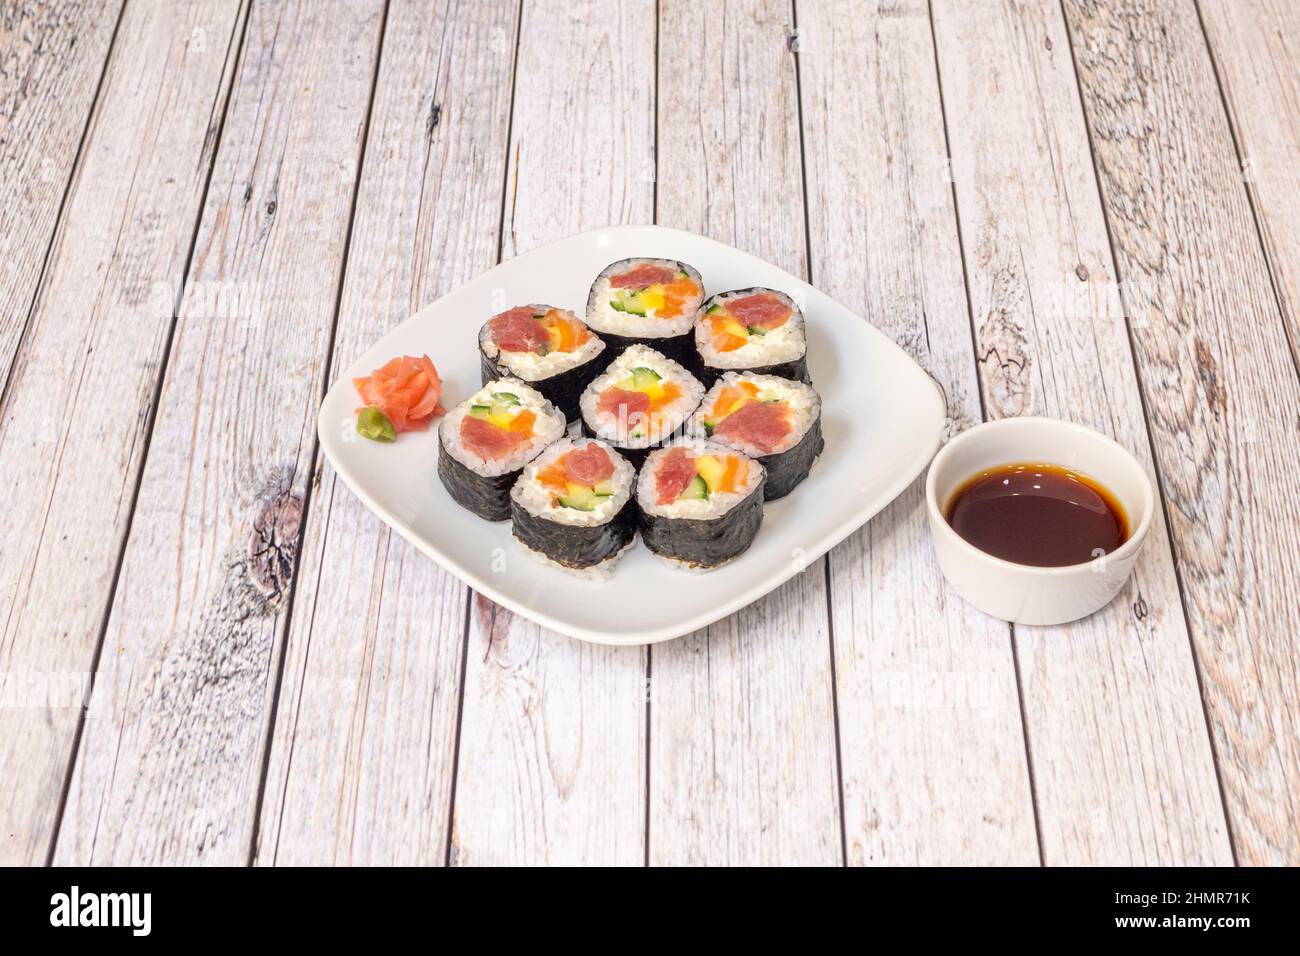 Maki sushi is therefore a roll of nori seaweed stuffed with rice and different ingredients such as fish, shellfish Stock Photo